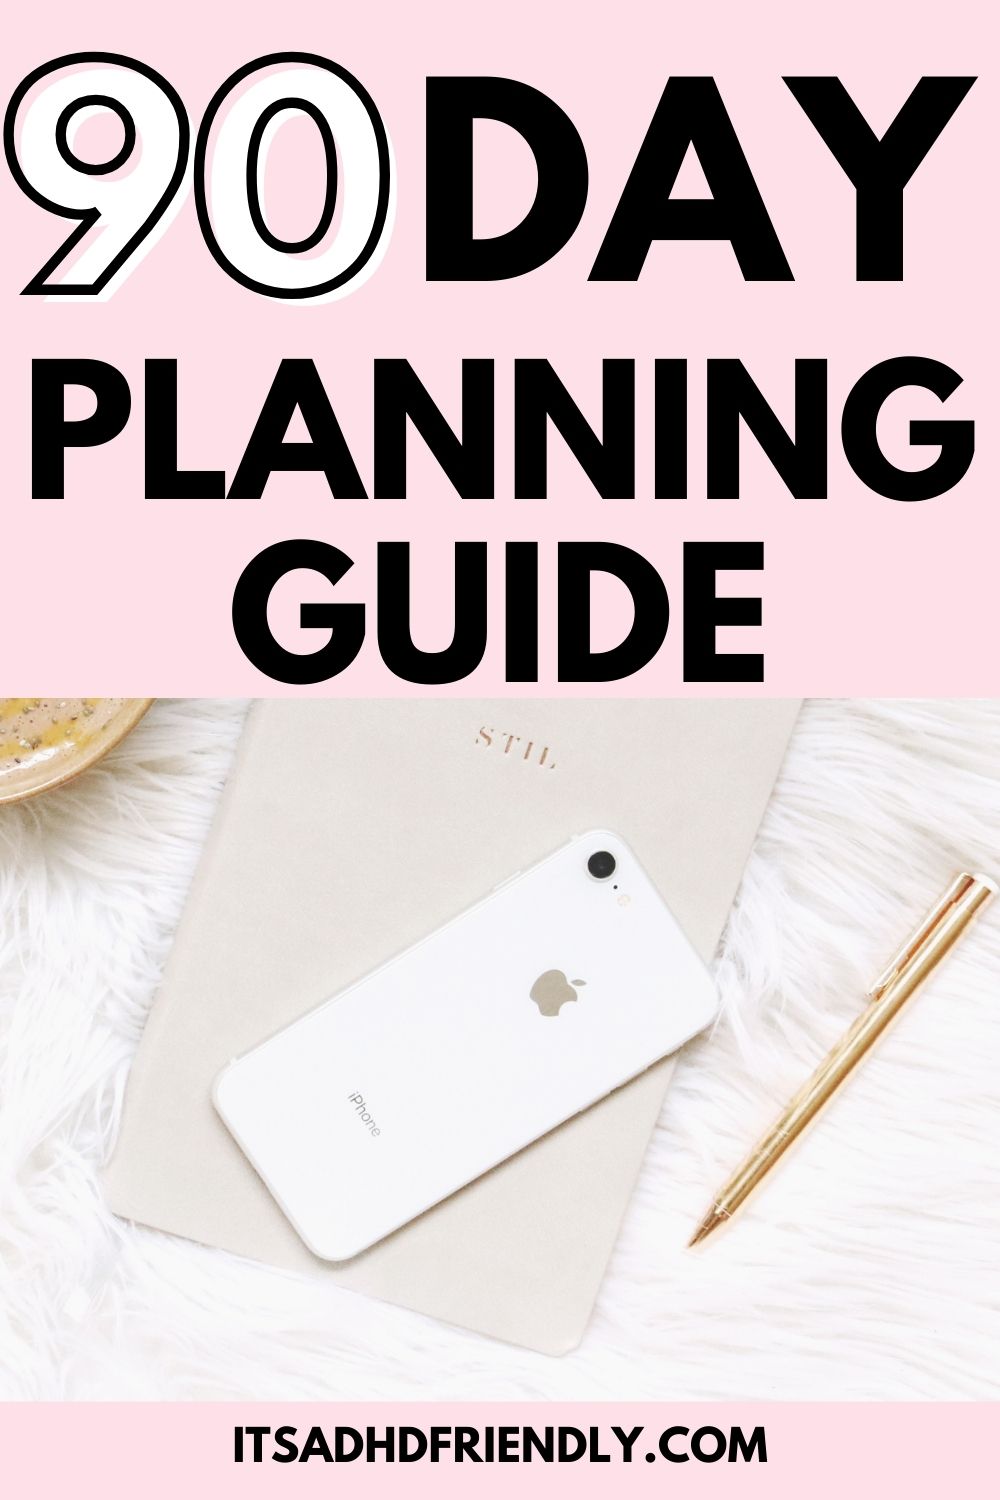 90 day planning guide